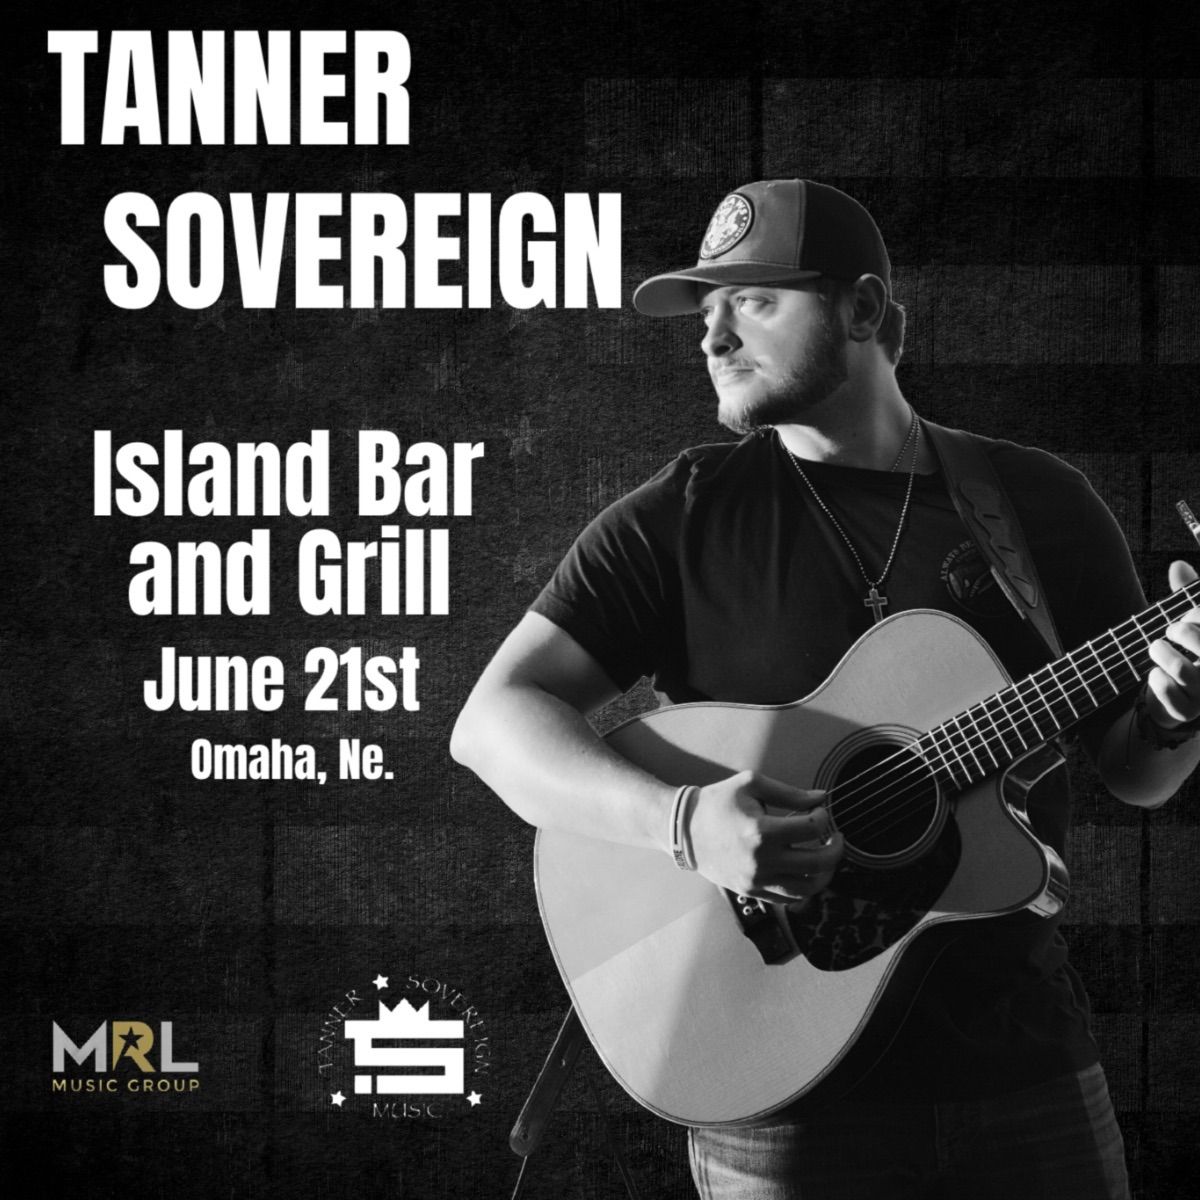 Tanner Sovereign @ Island Bar & Grill